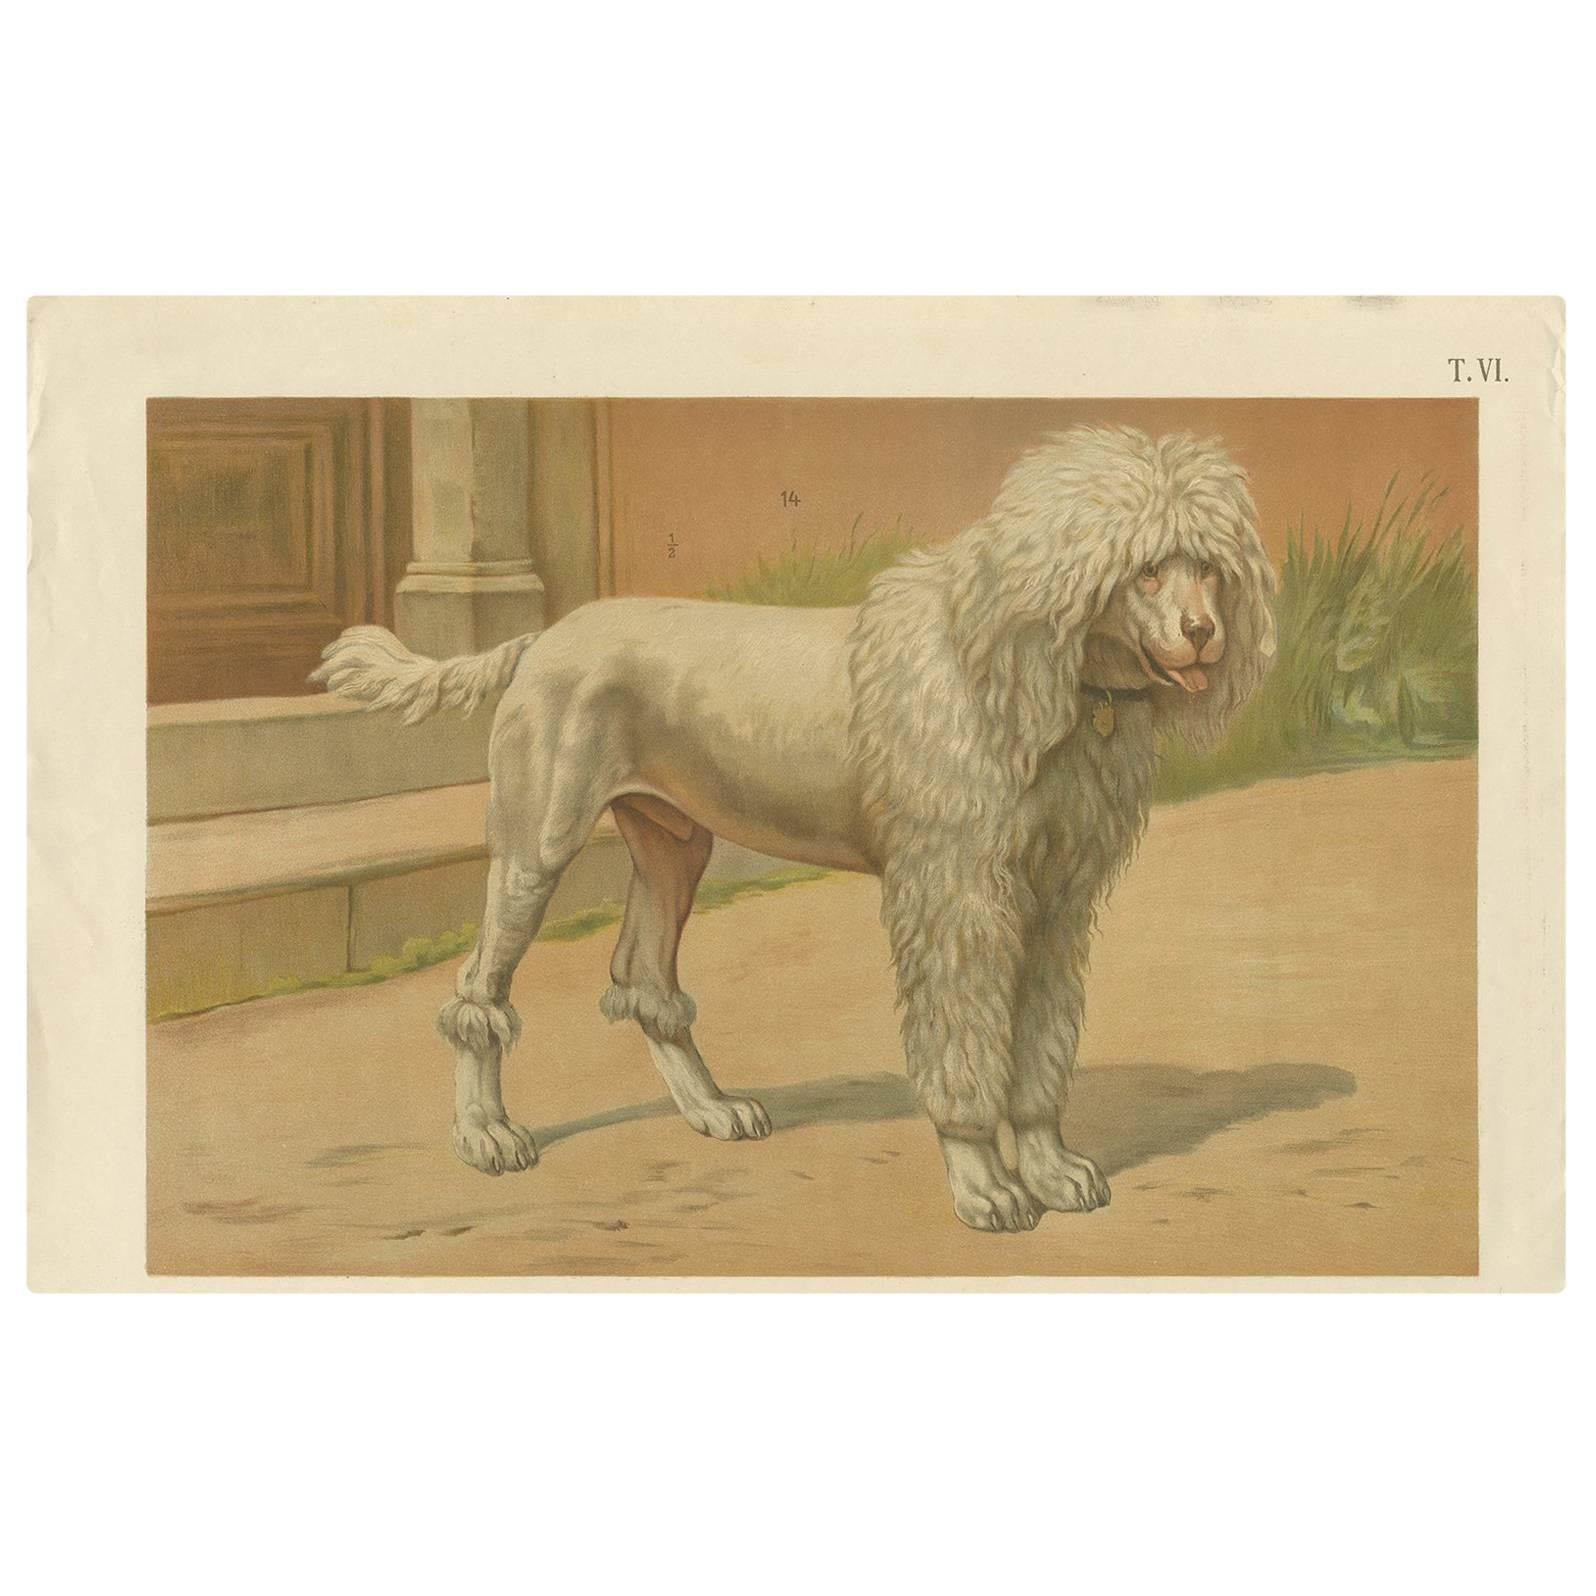 Antique Dog Print of a Poodle by Th. Breidwiser, 1879 For Sale